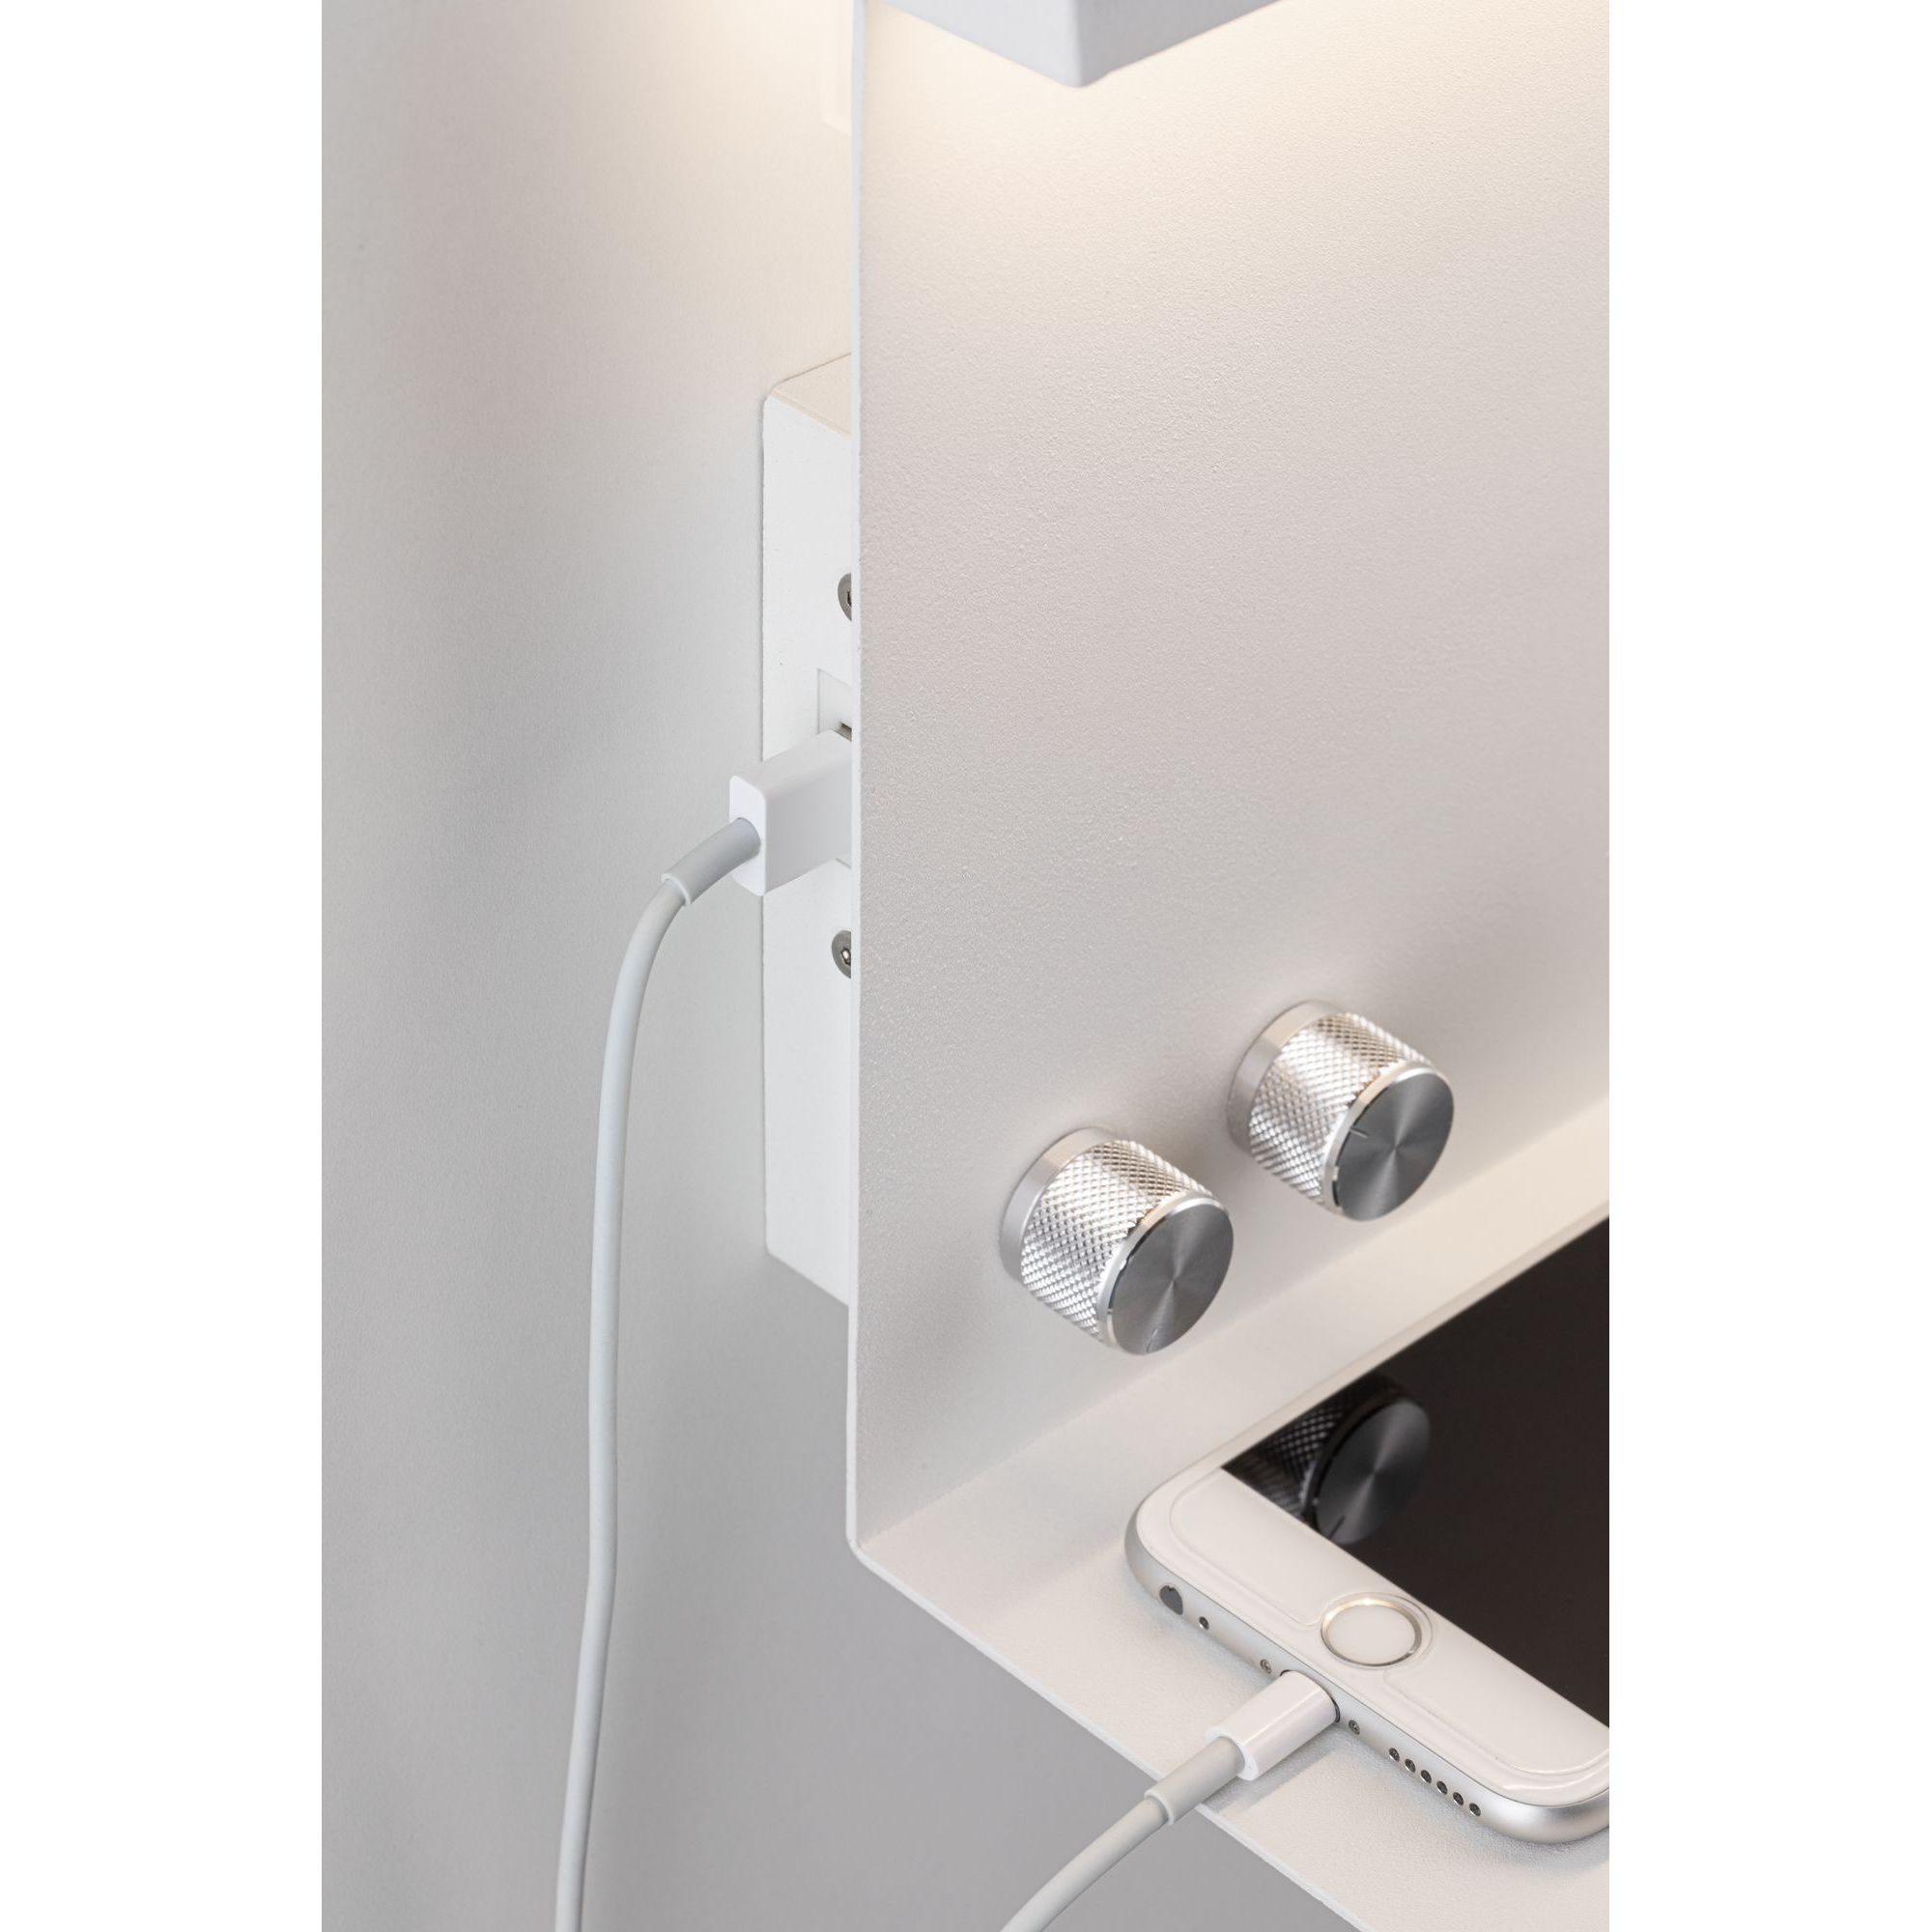 Wandlampe 'Jarina' Metall weiß 440/160 lm + product picture